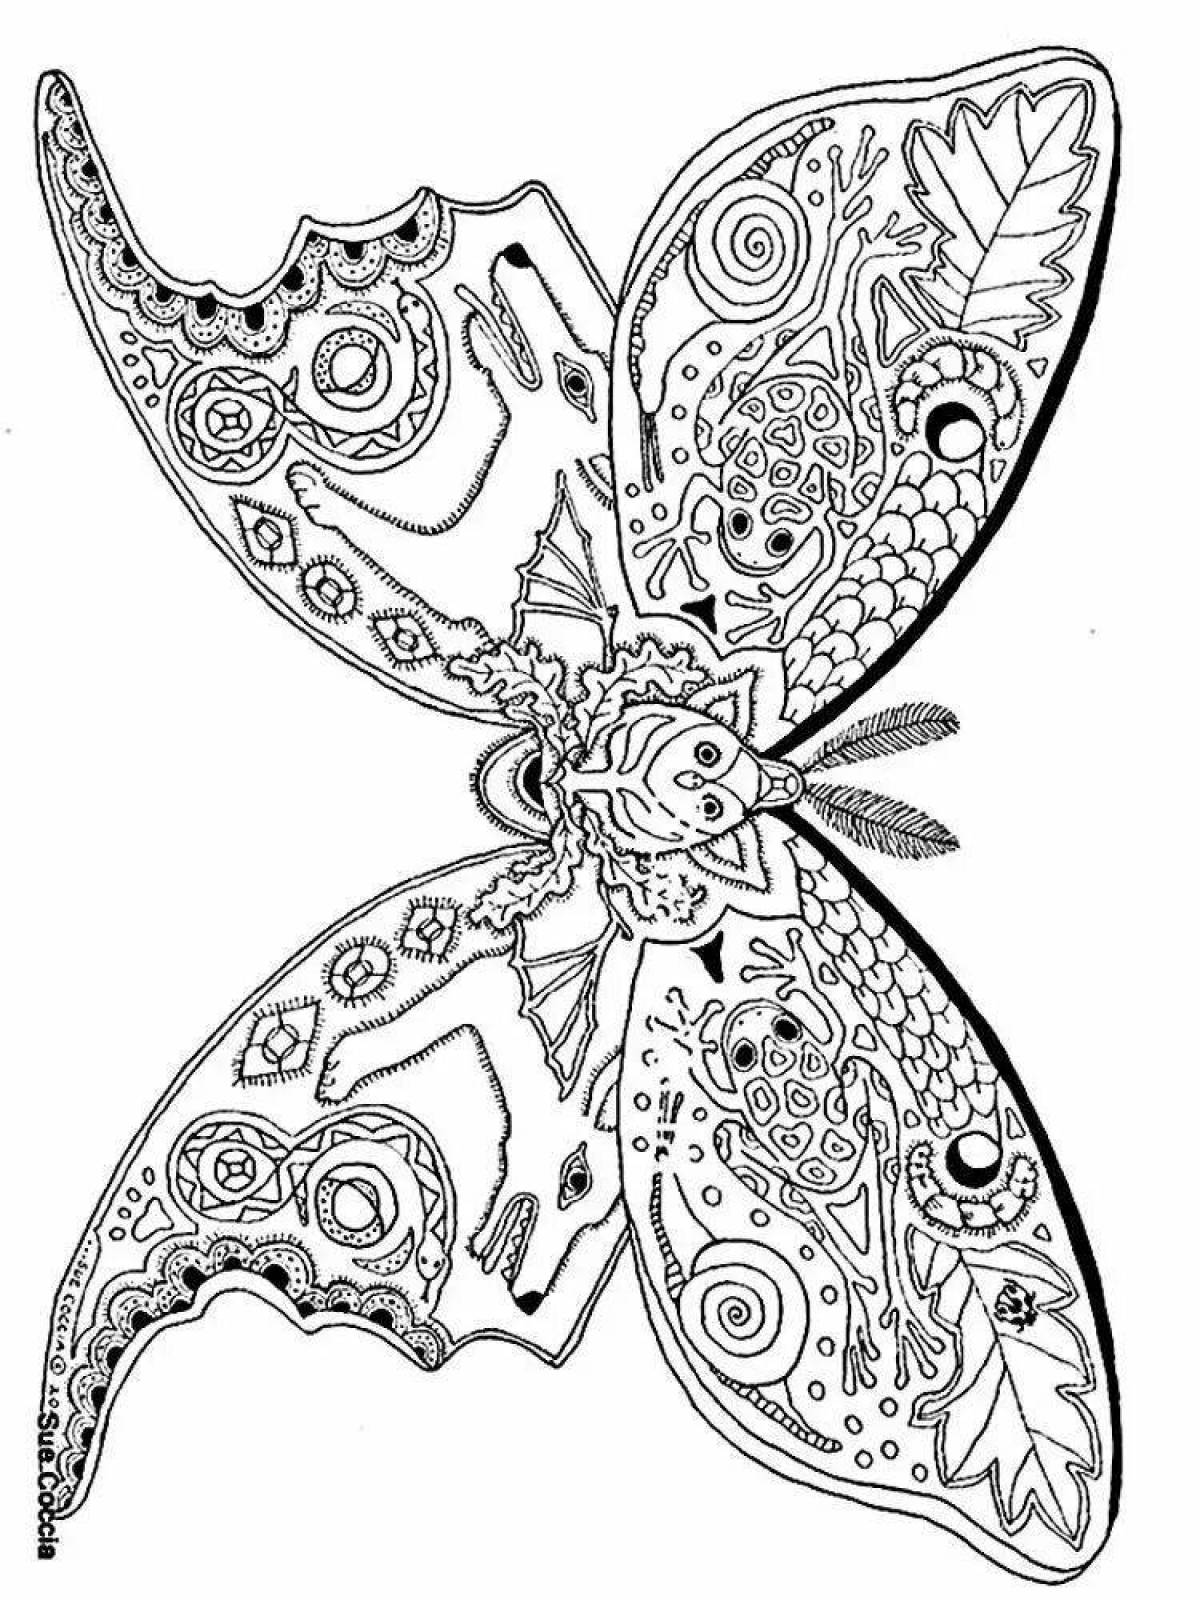 Blissful psychological anti-stress coloring book